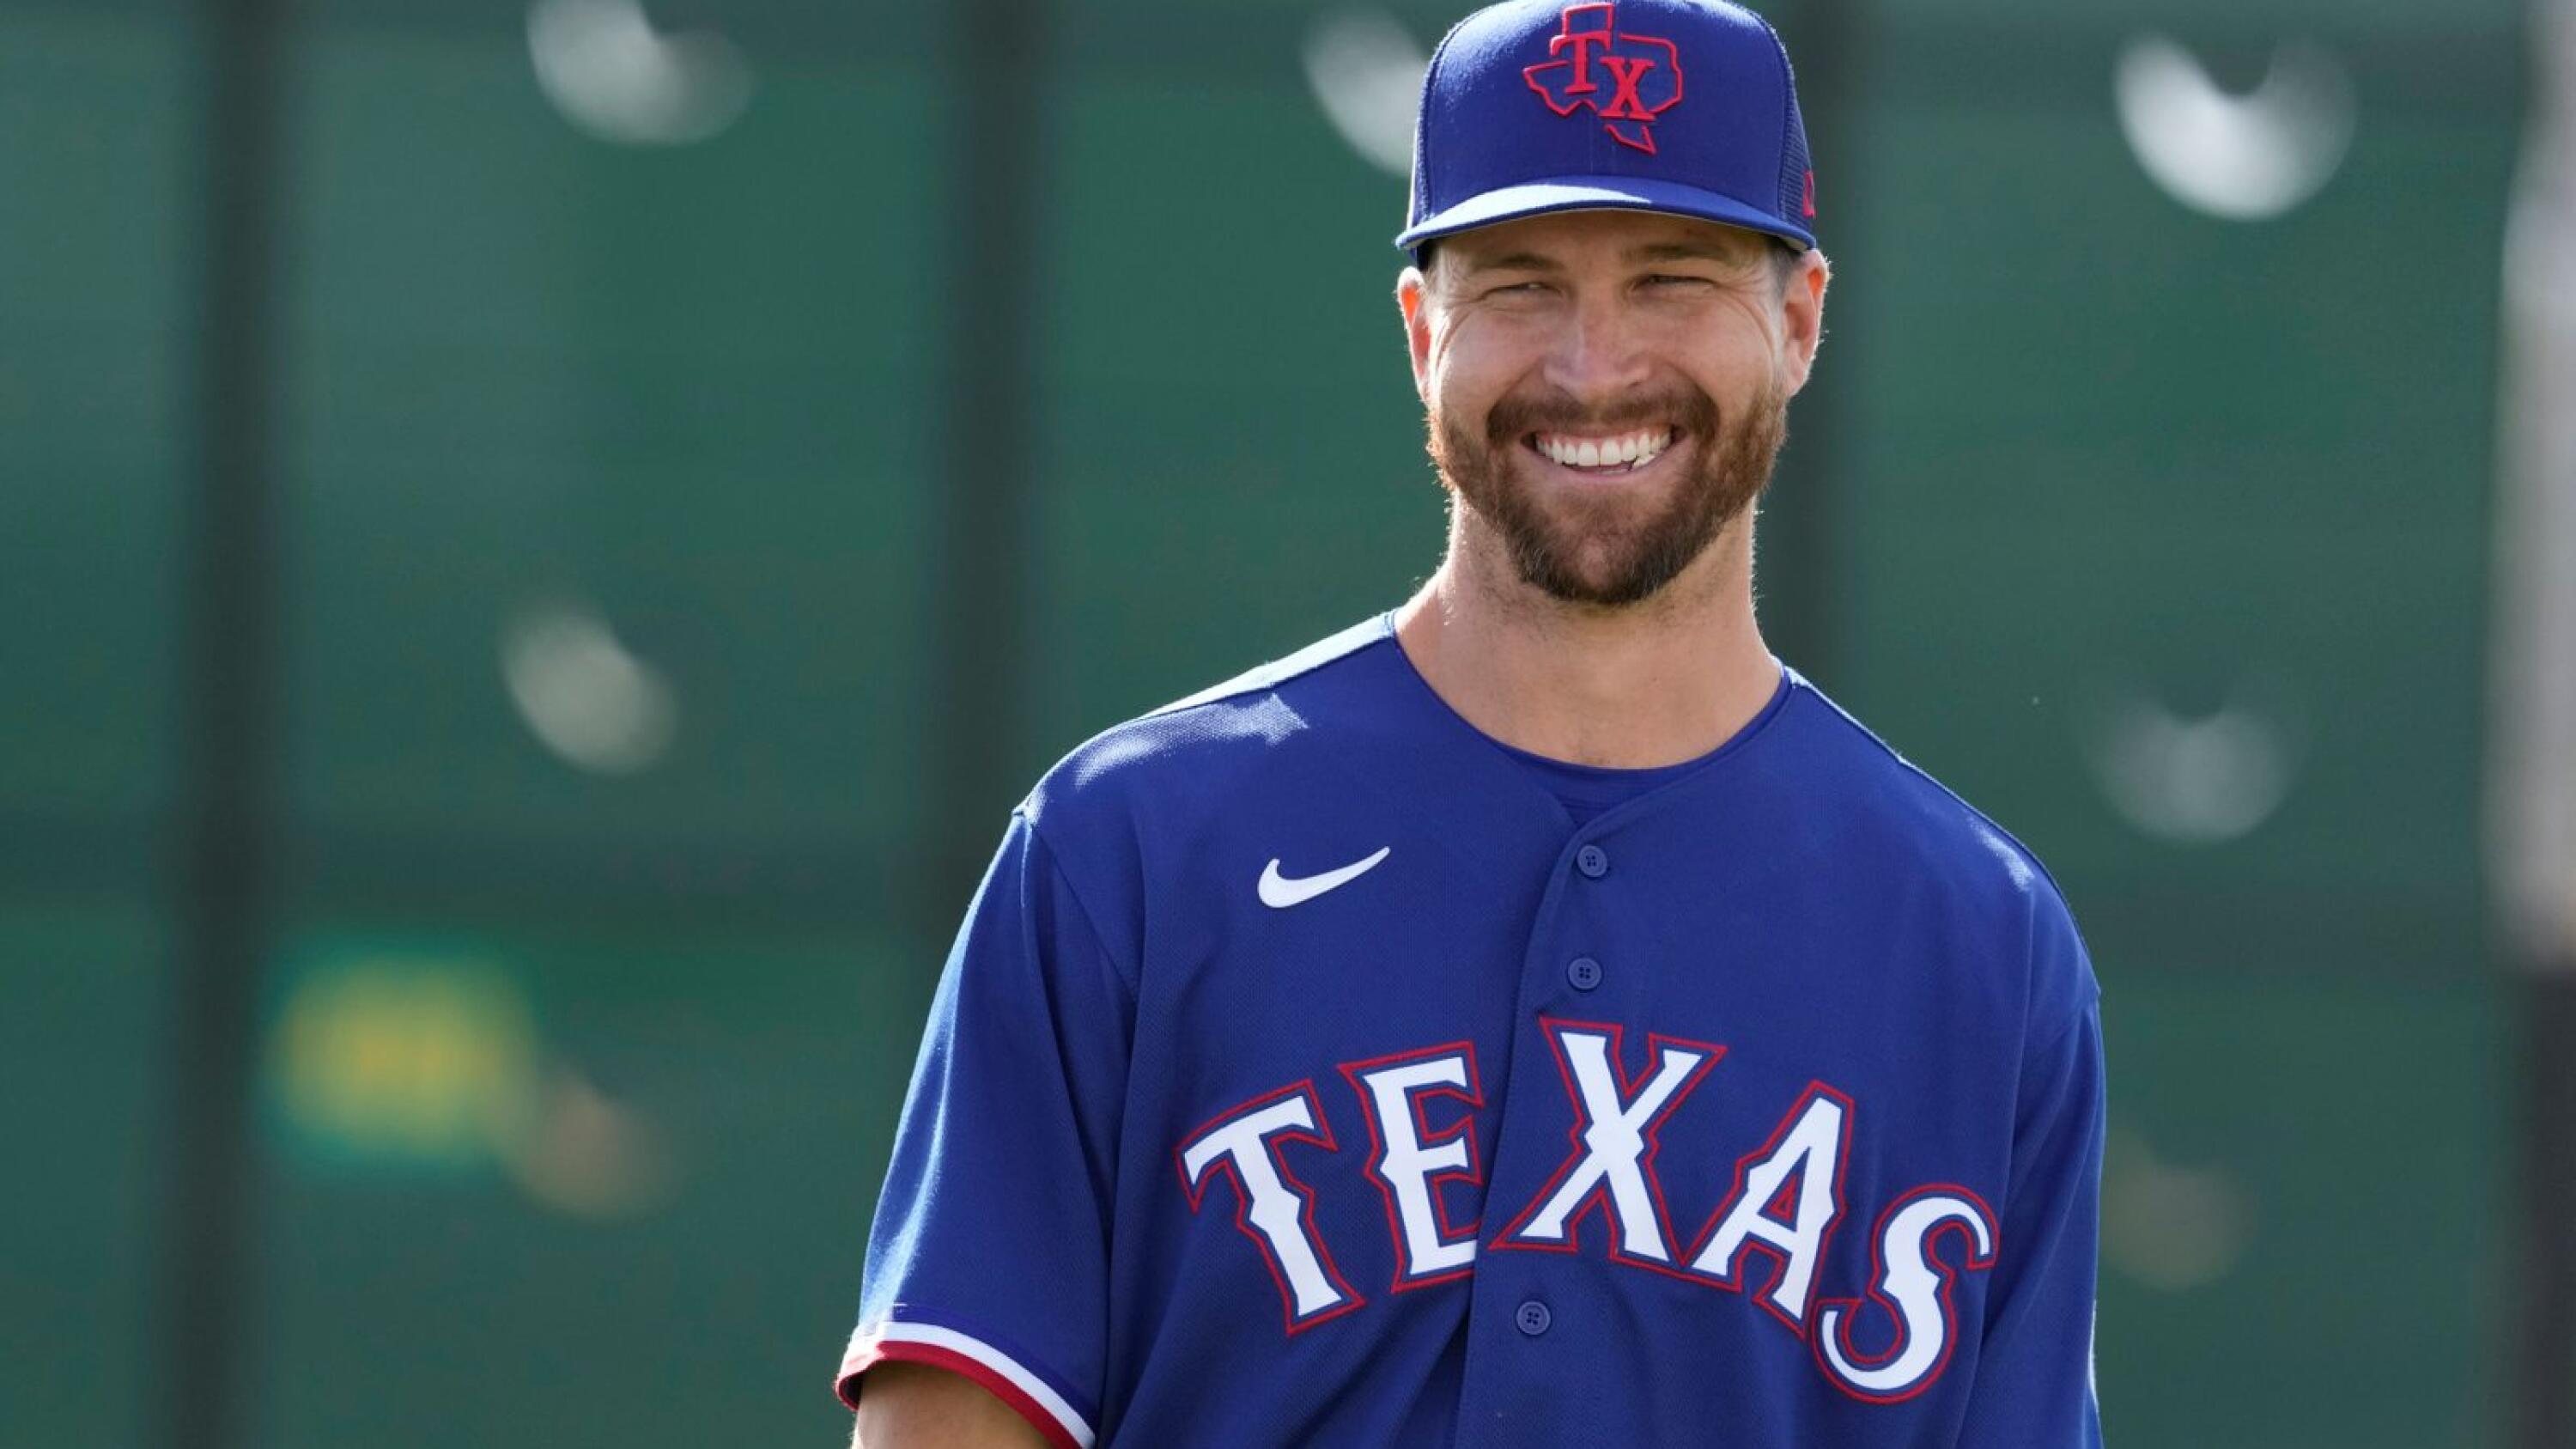 Rangers finally see deGrom in a game, against minor leaguers